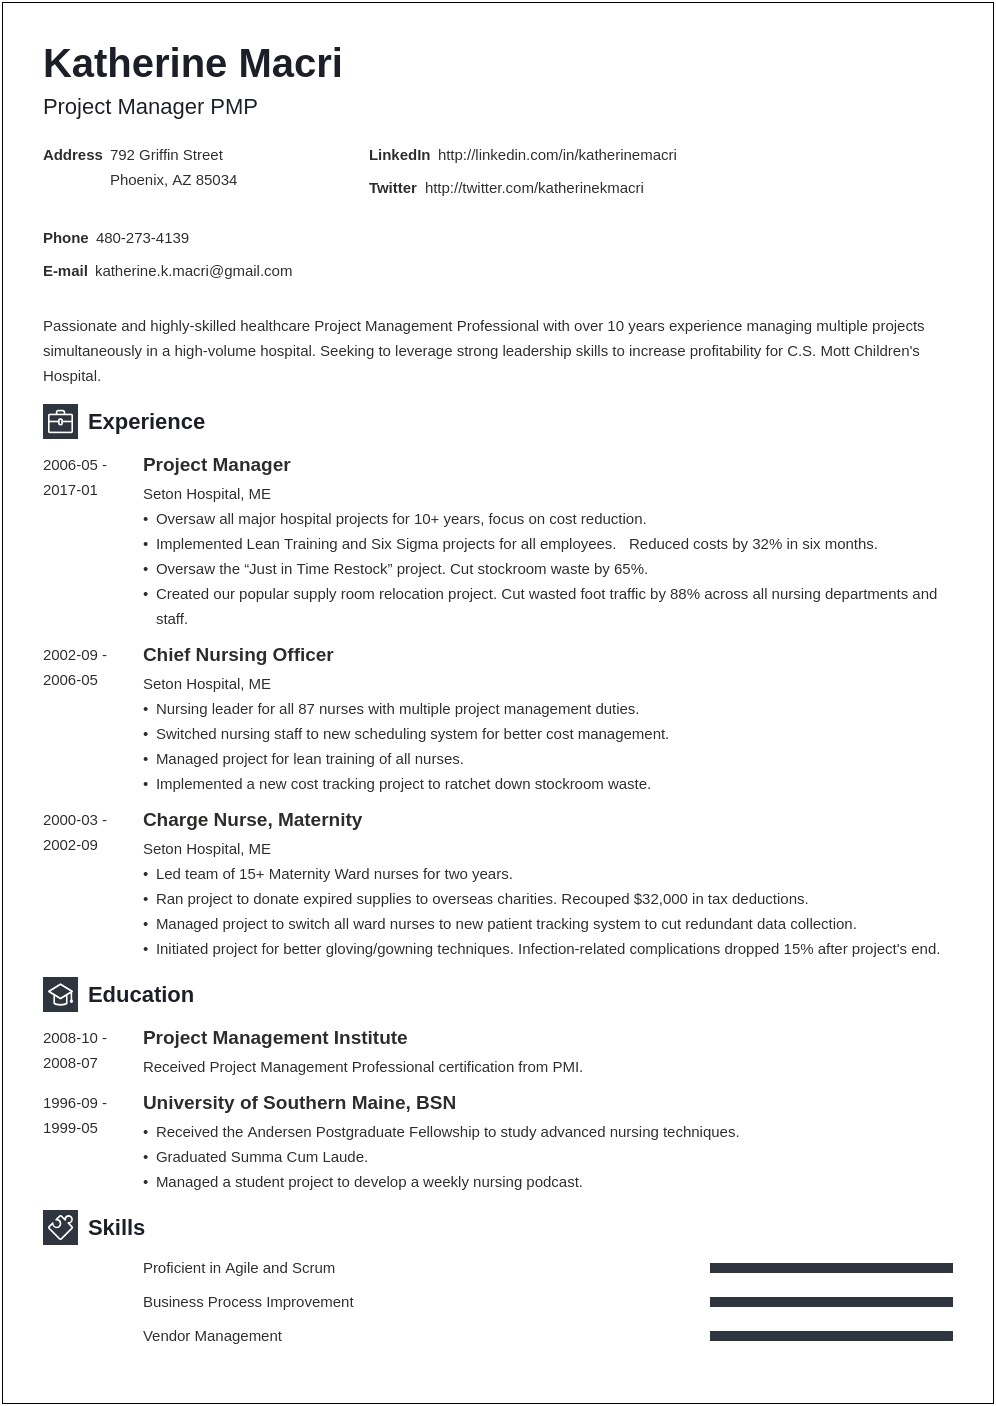 Project Manager Description For A Resume